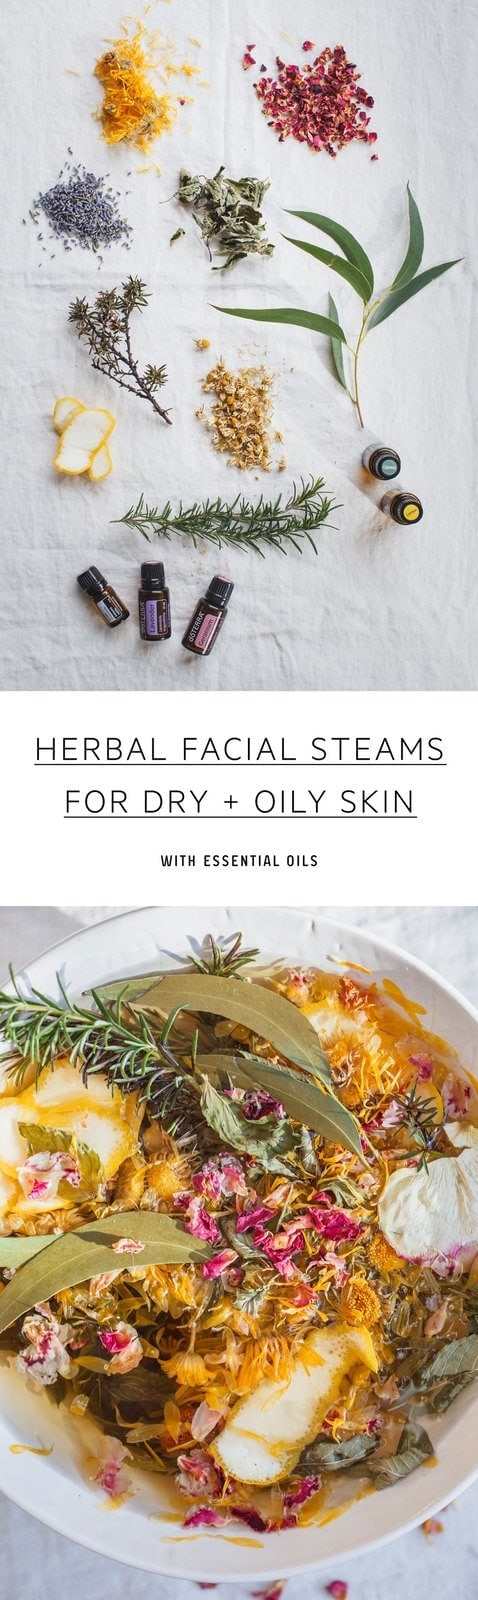 A simple herbal facial steam with added essential oils – recipes for both dry and oily skin. The combination of steam with botanicals will cleanse the skin, remove impurities, hydrate and promote circulation, aid in skin renewal and calm the nervous system. Read on to learn more about facial steam benefits. #facialsteam #herbalfacial #herbalfacialsteam #diybeauty #diyskin #diyspa #essentialoilsskin #doterraskin #herbsforskin #diysparecipes #diybeautyideas #homefacial #homefacialsteam #AscensionKitchen // Pin to your own inspiration board! //